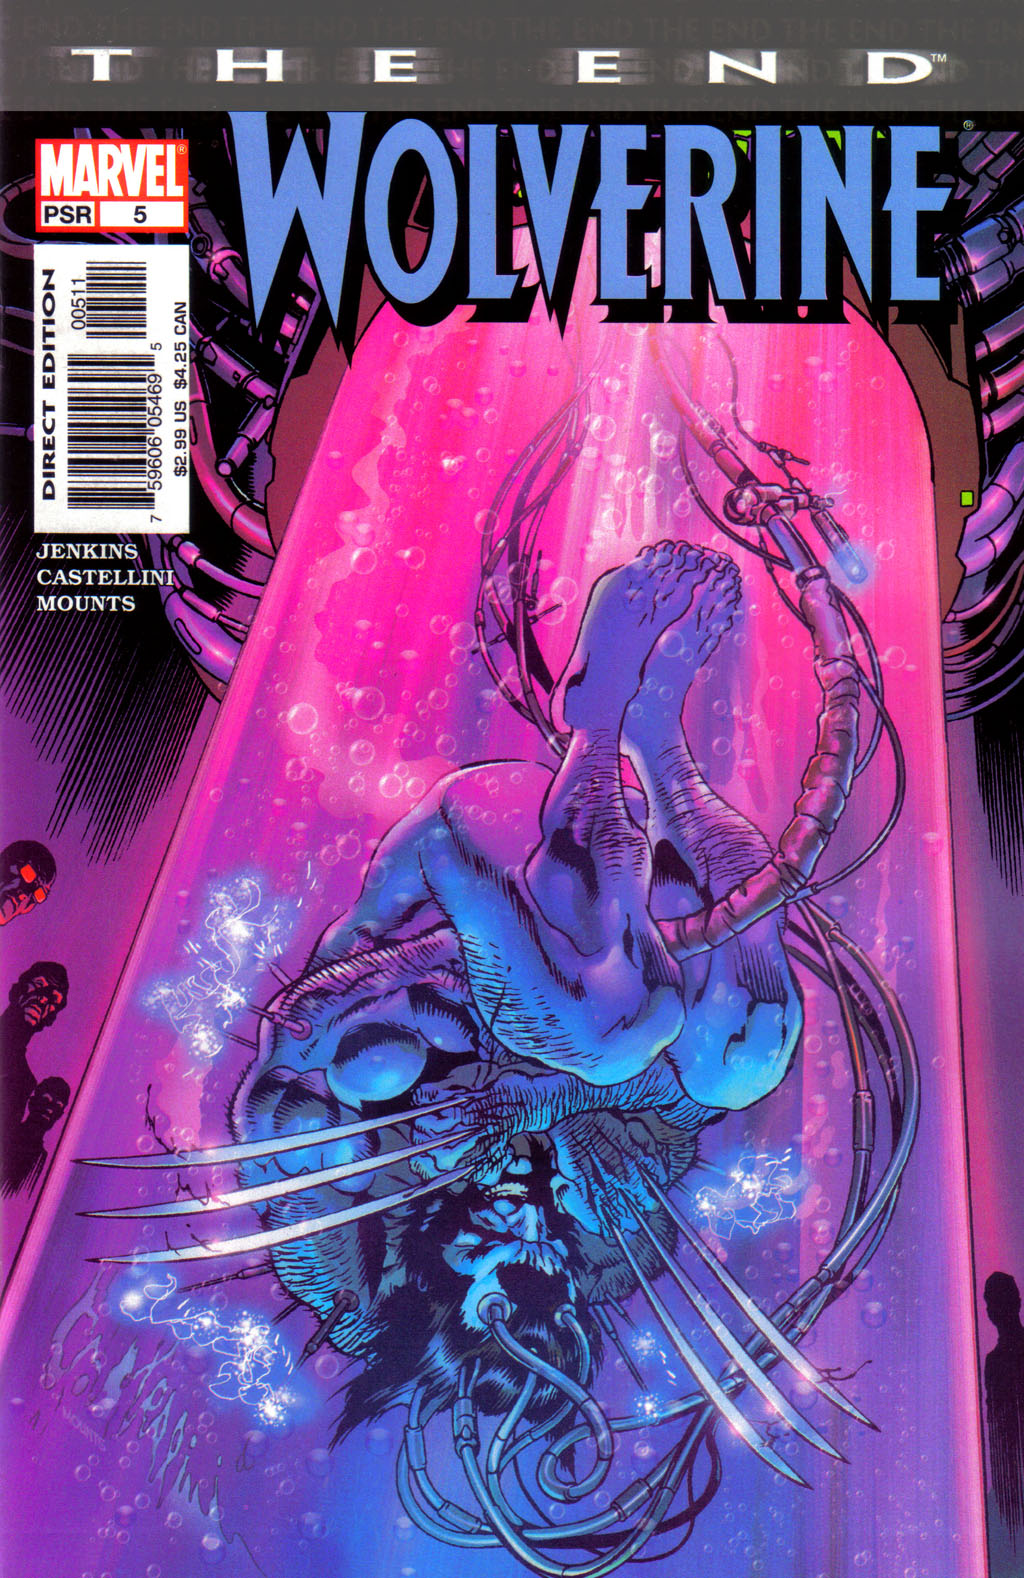 Wolverine: The End Vol. 1 #5